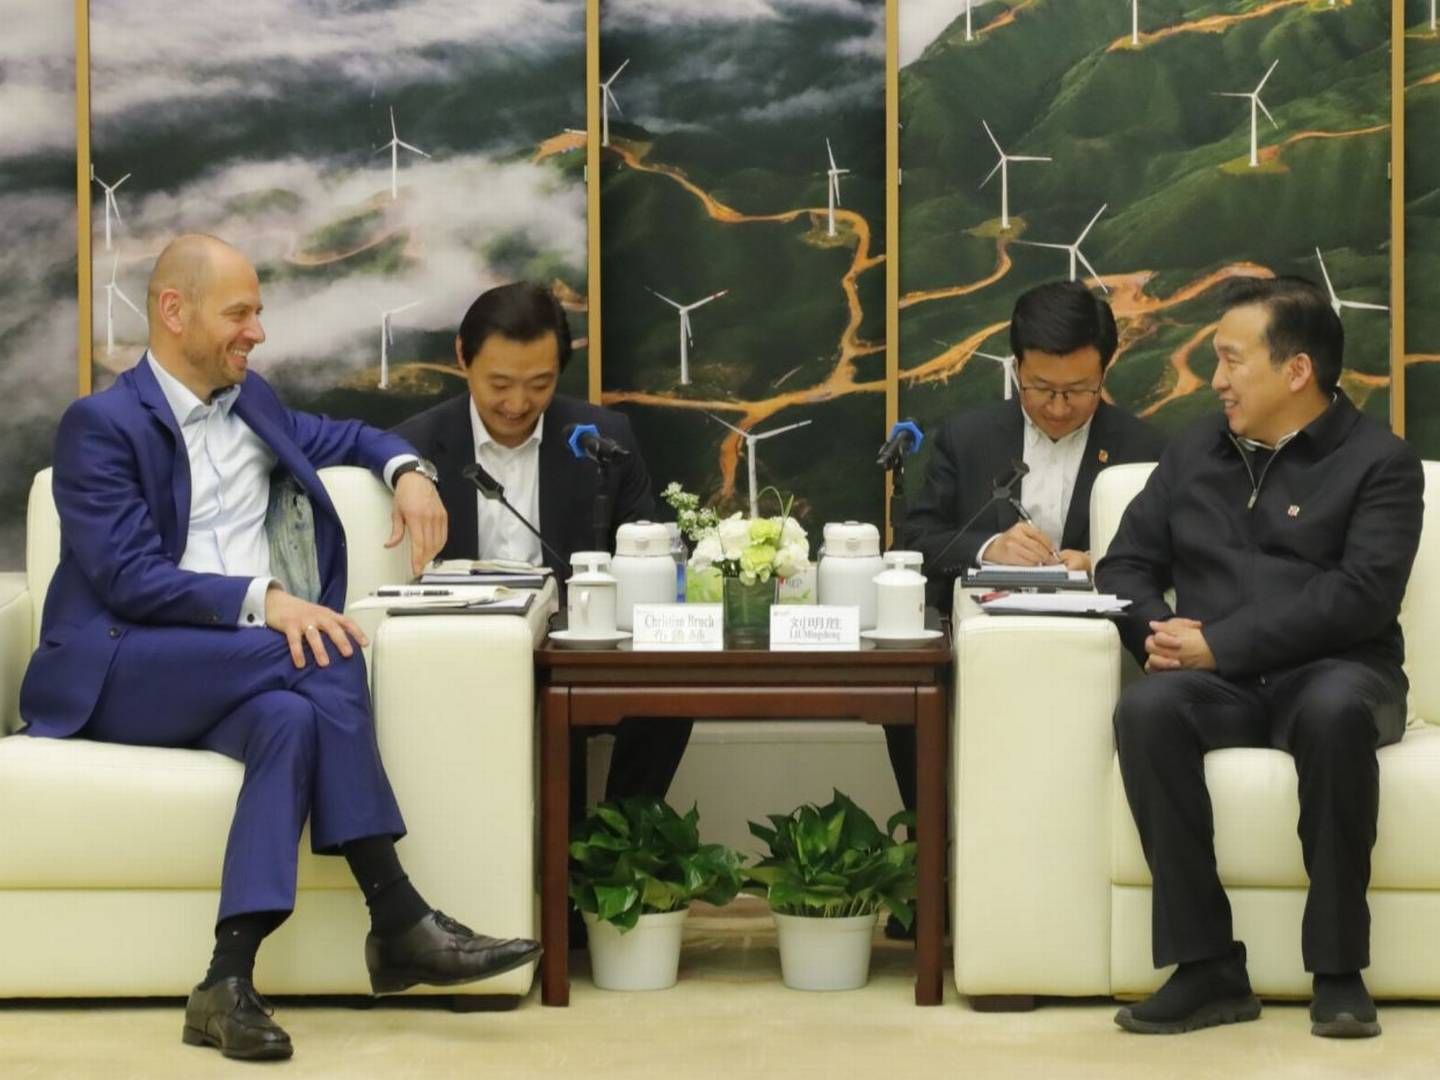 Siemens Energy is also doing good business in China, says CEO Christian Bruch, who last month participated in the Chinese organized Boao Forum for Asia. | Photo: Siemens Energy